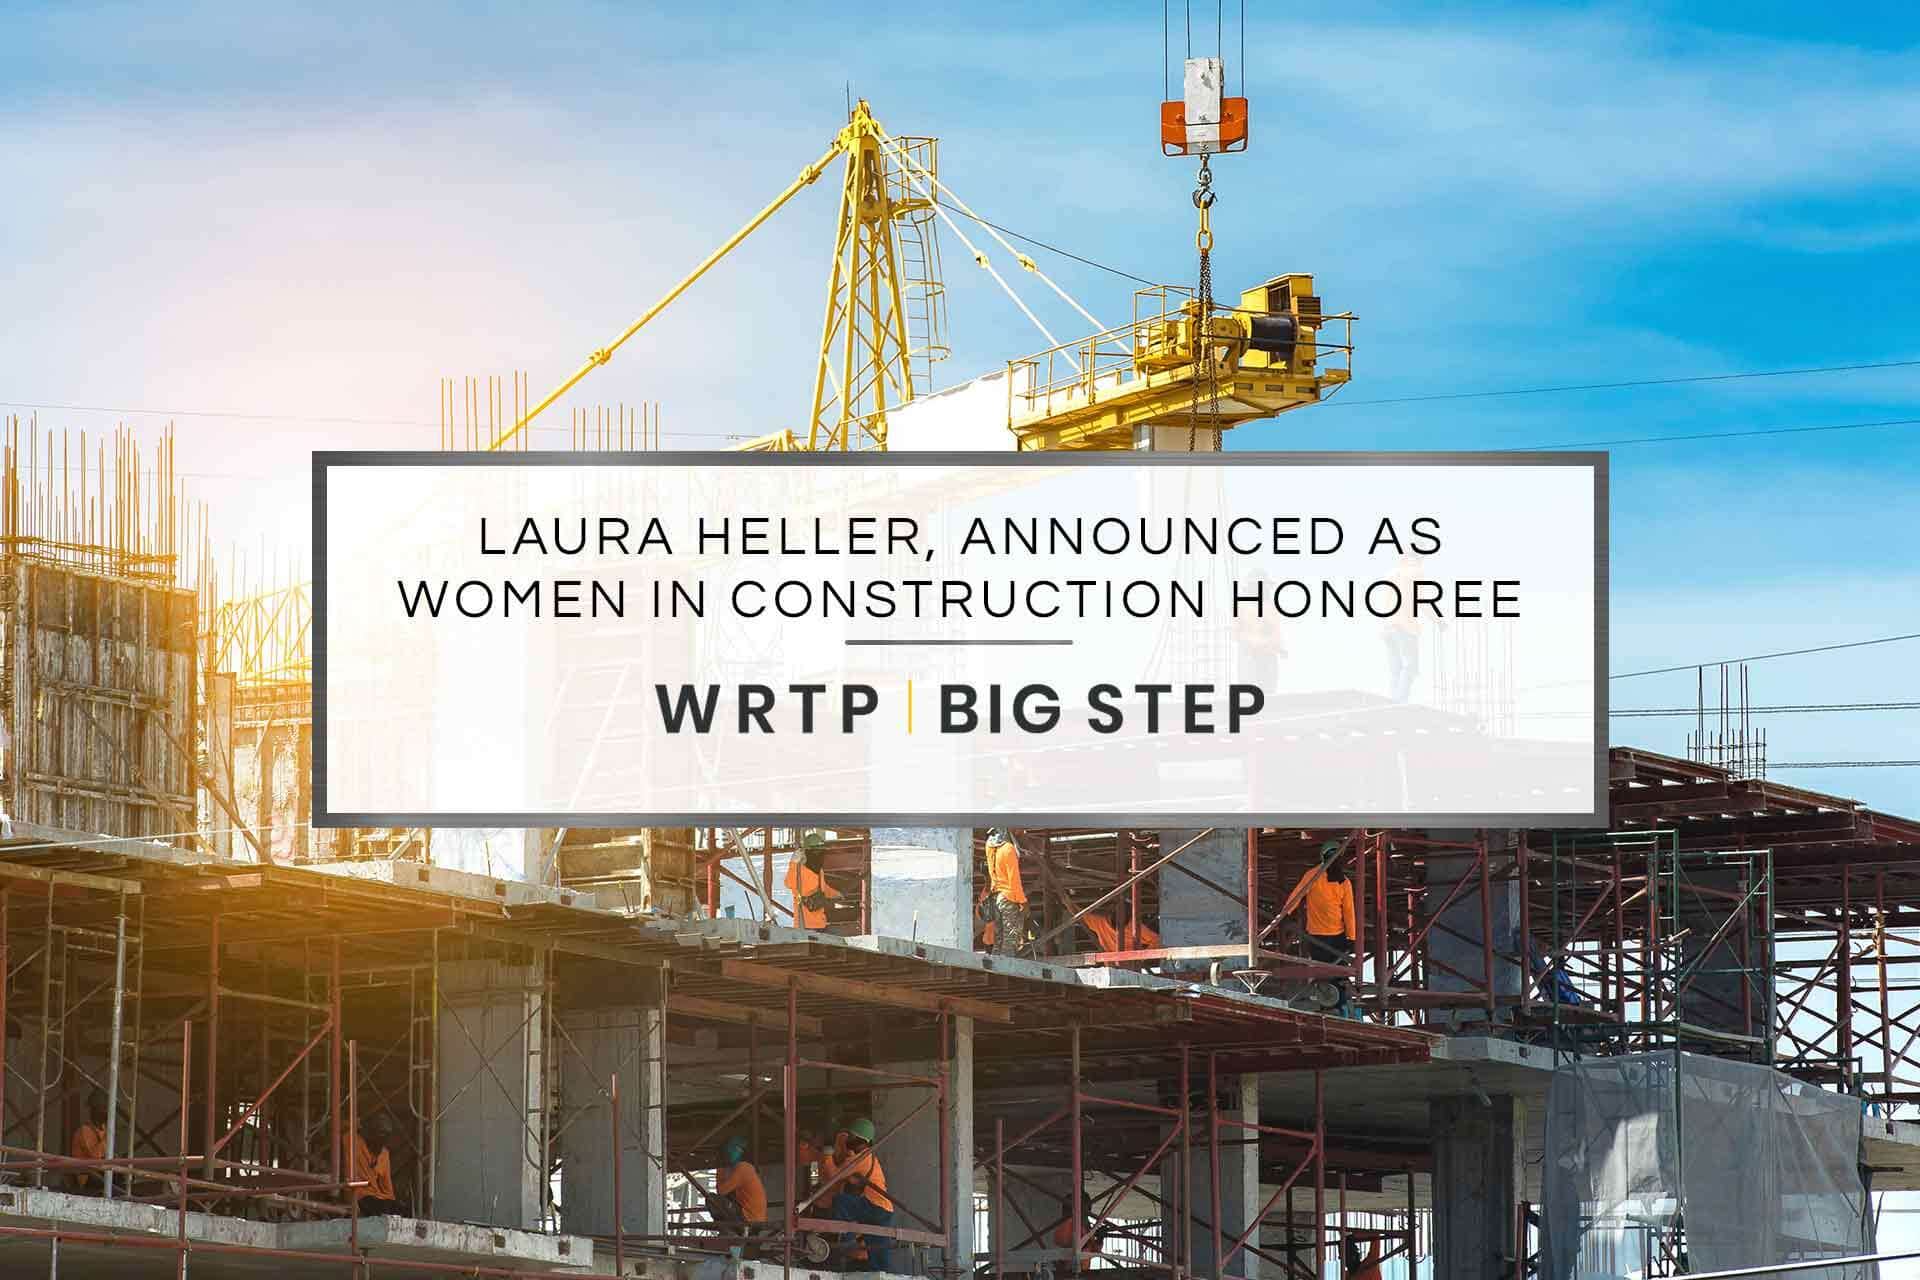 Former WRTP/BIG STEP Milwaukee Site Director, Laura Heller, Announced as Women in Construction Honoree